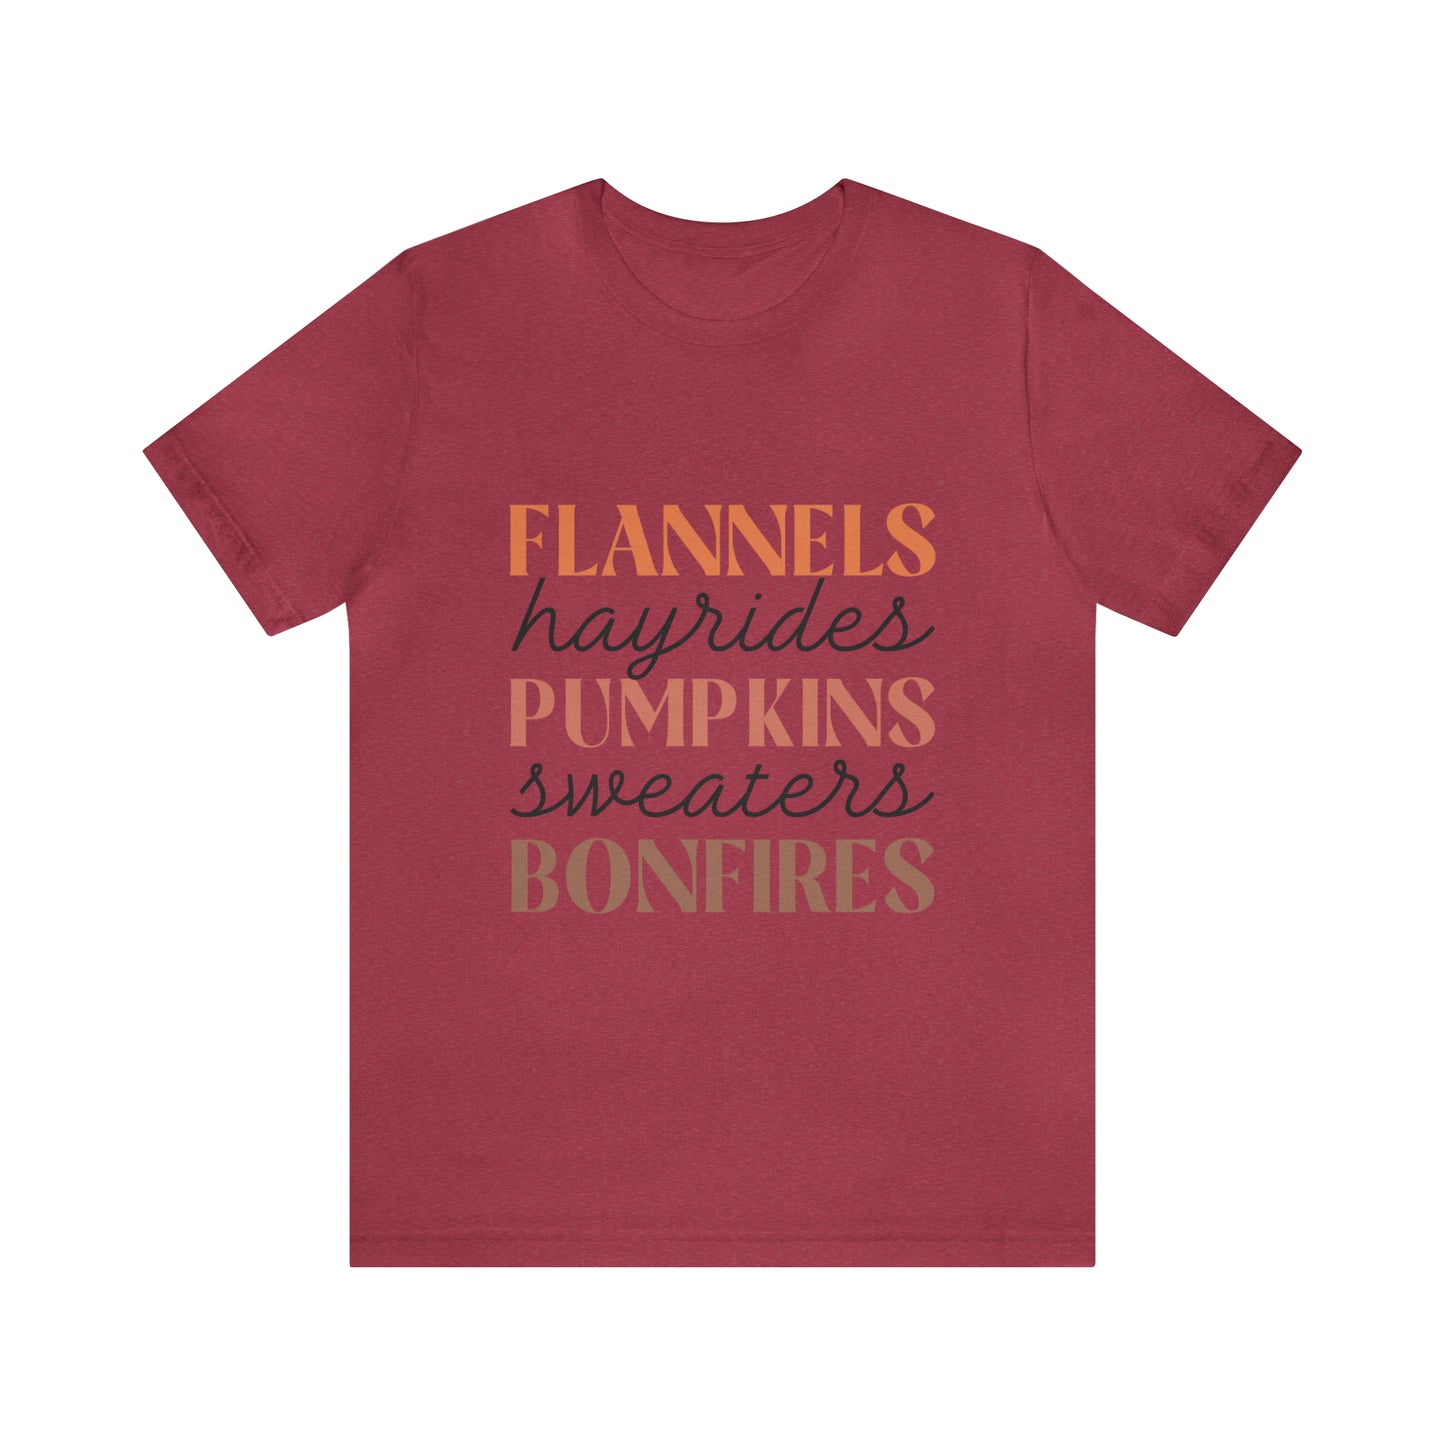 All the fall things T-shirt